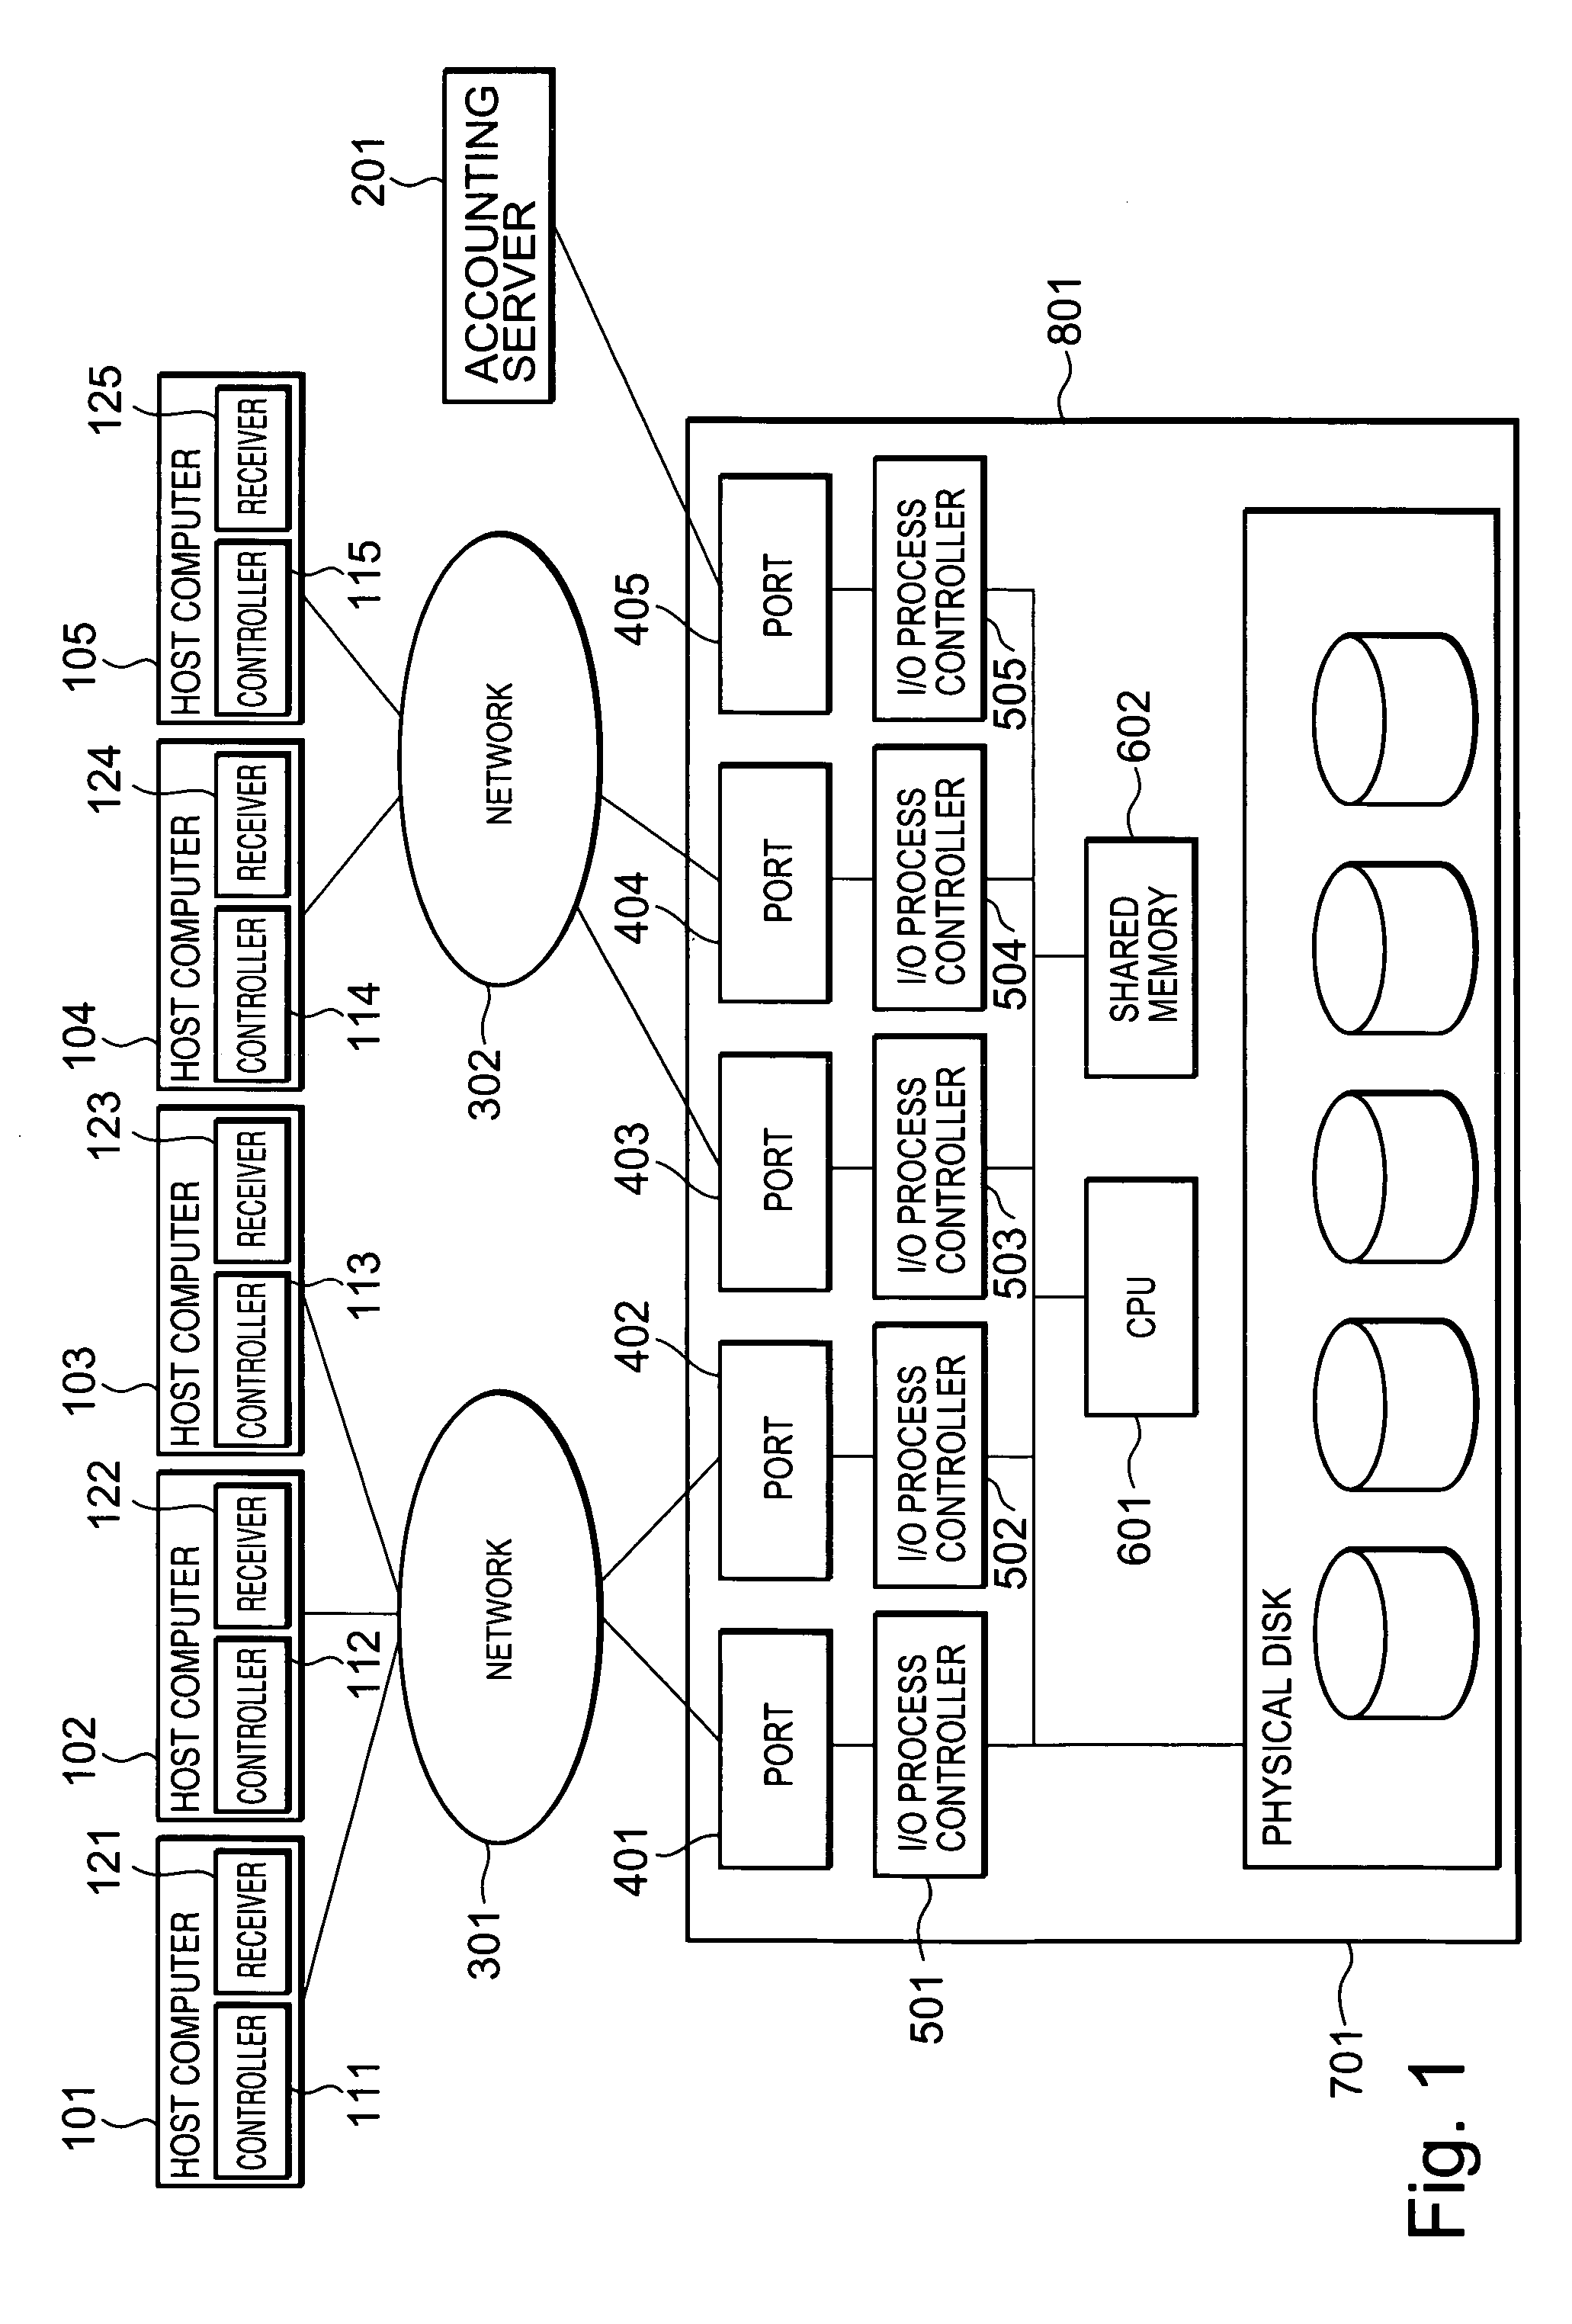 Storage accounting system, method of storage accounting system, and signal-bearing medium embodying program for performing storage system